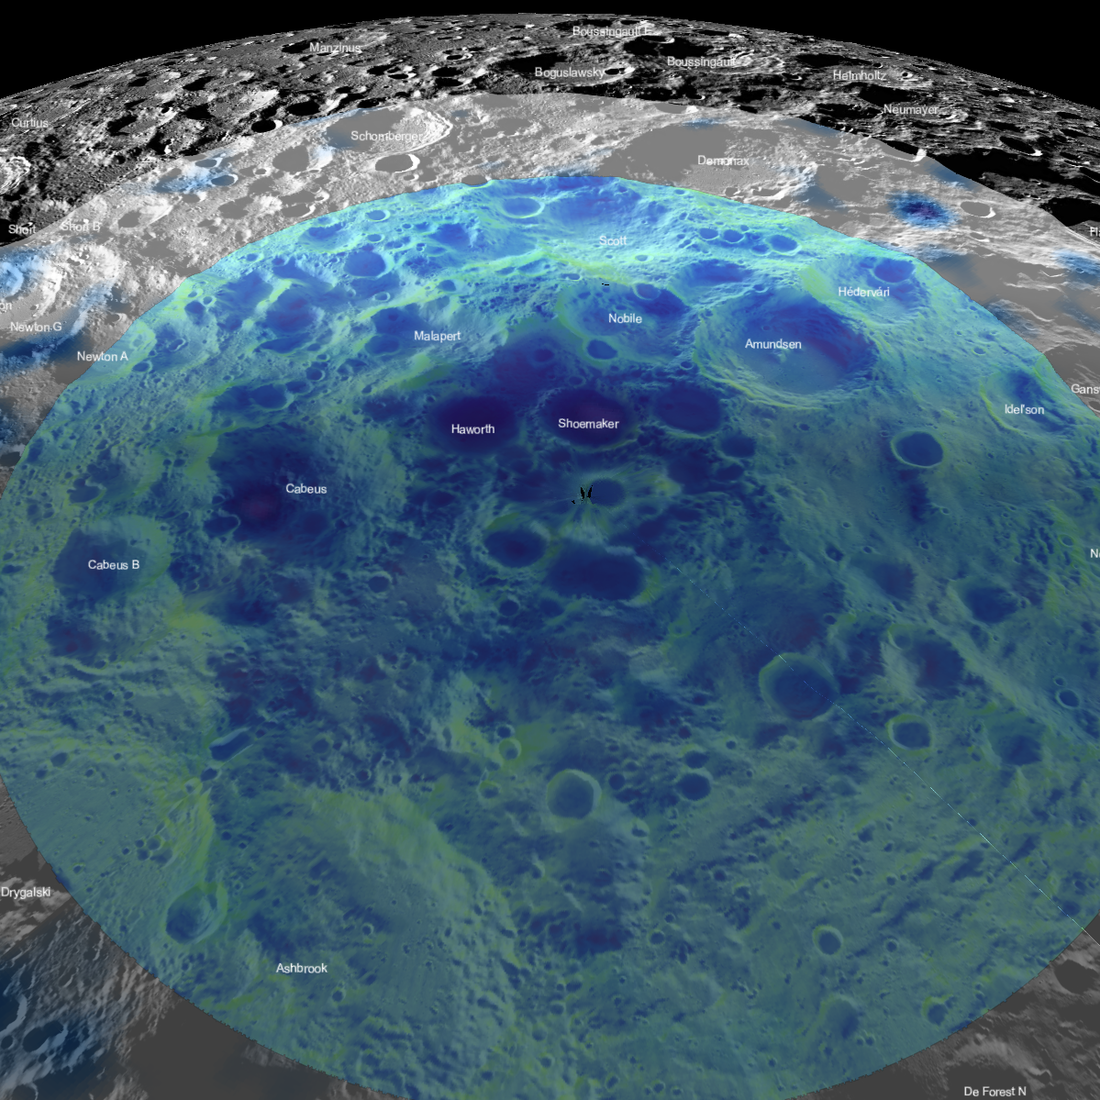 A view of the lunar south pole via Lunar Quickmap showing a selection of south pole numeric layers.